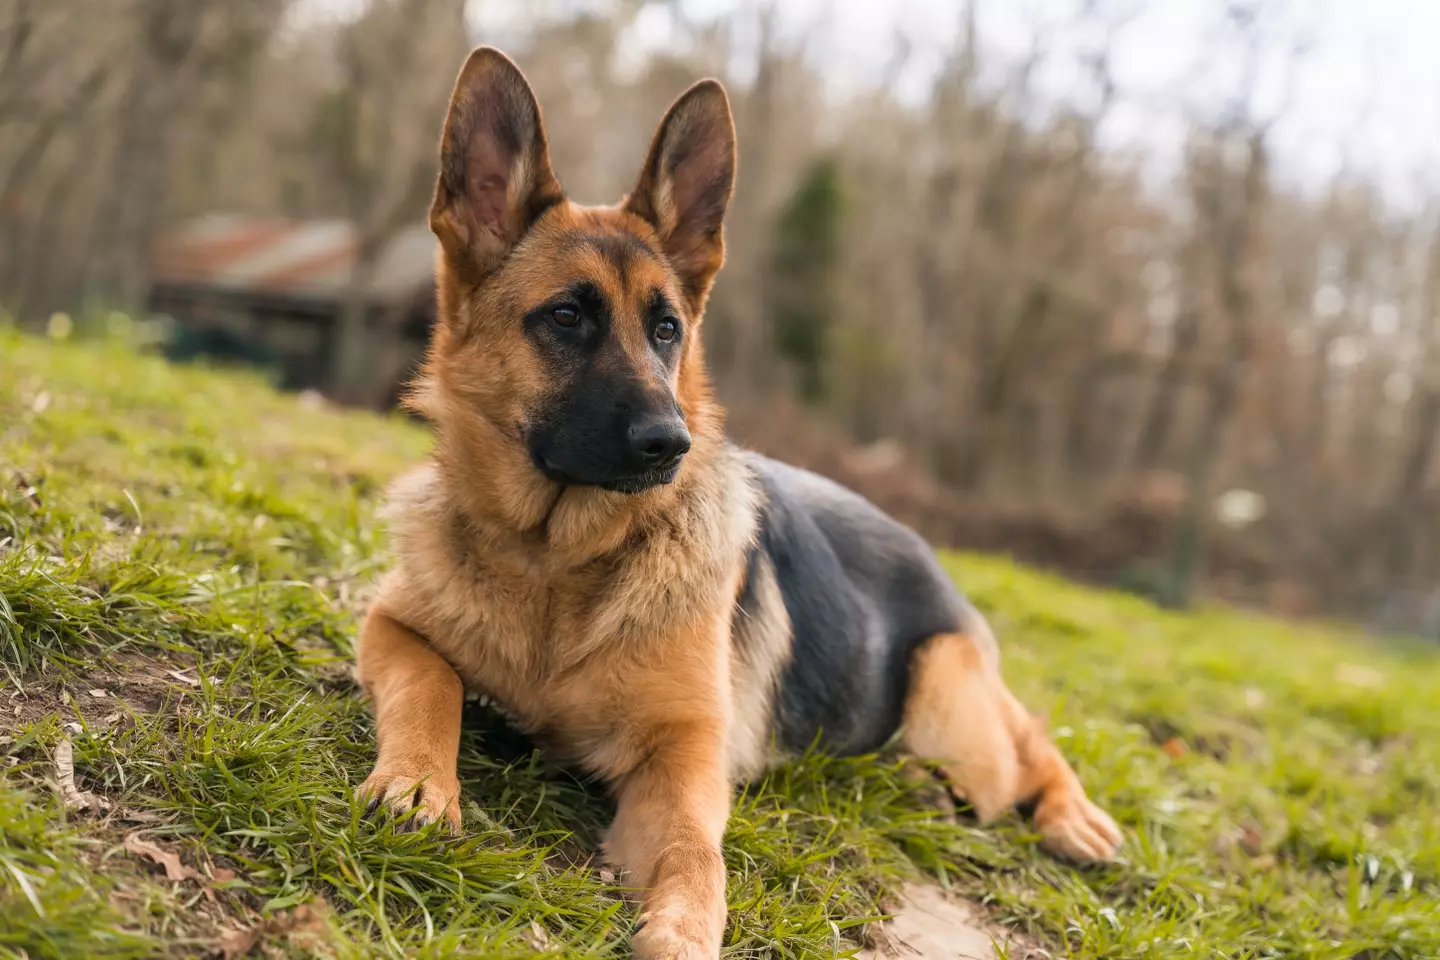 German shepherds were included on the list.